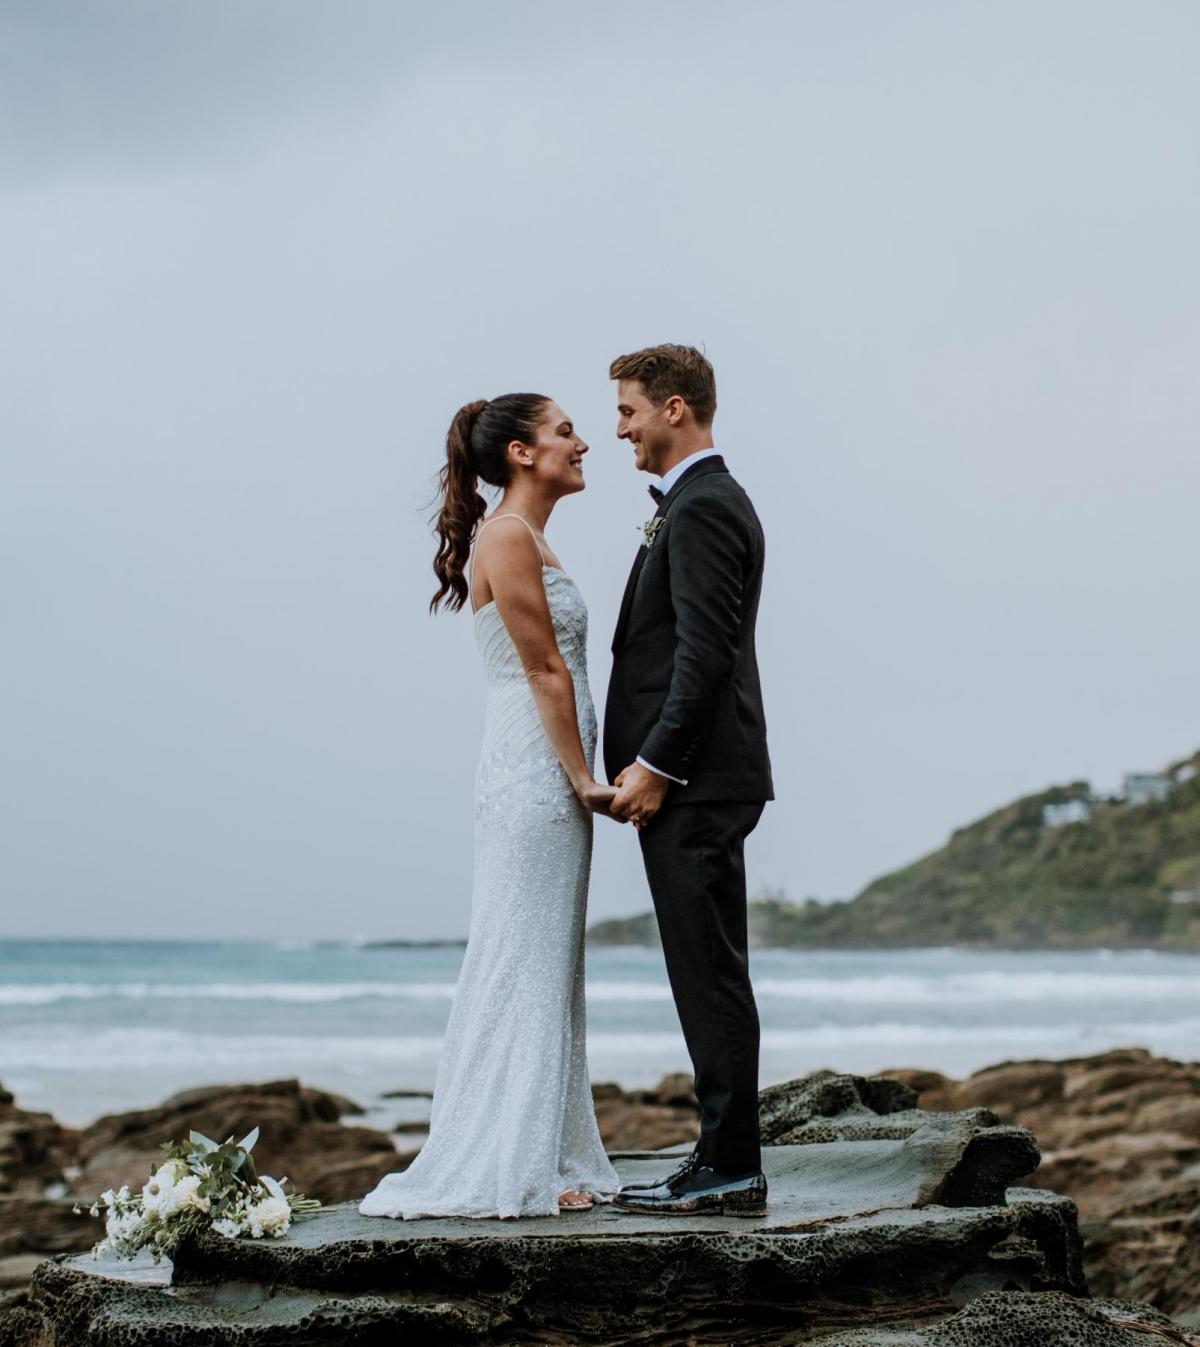 Real bride Ruby in her Darcy gown by Karen Willis Holmes. stands with her husband in front of an epic ocean background.